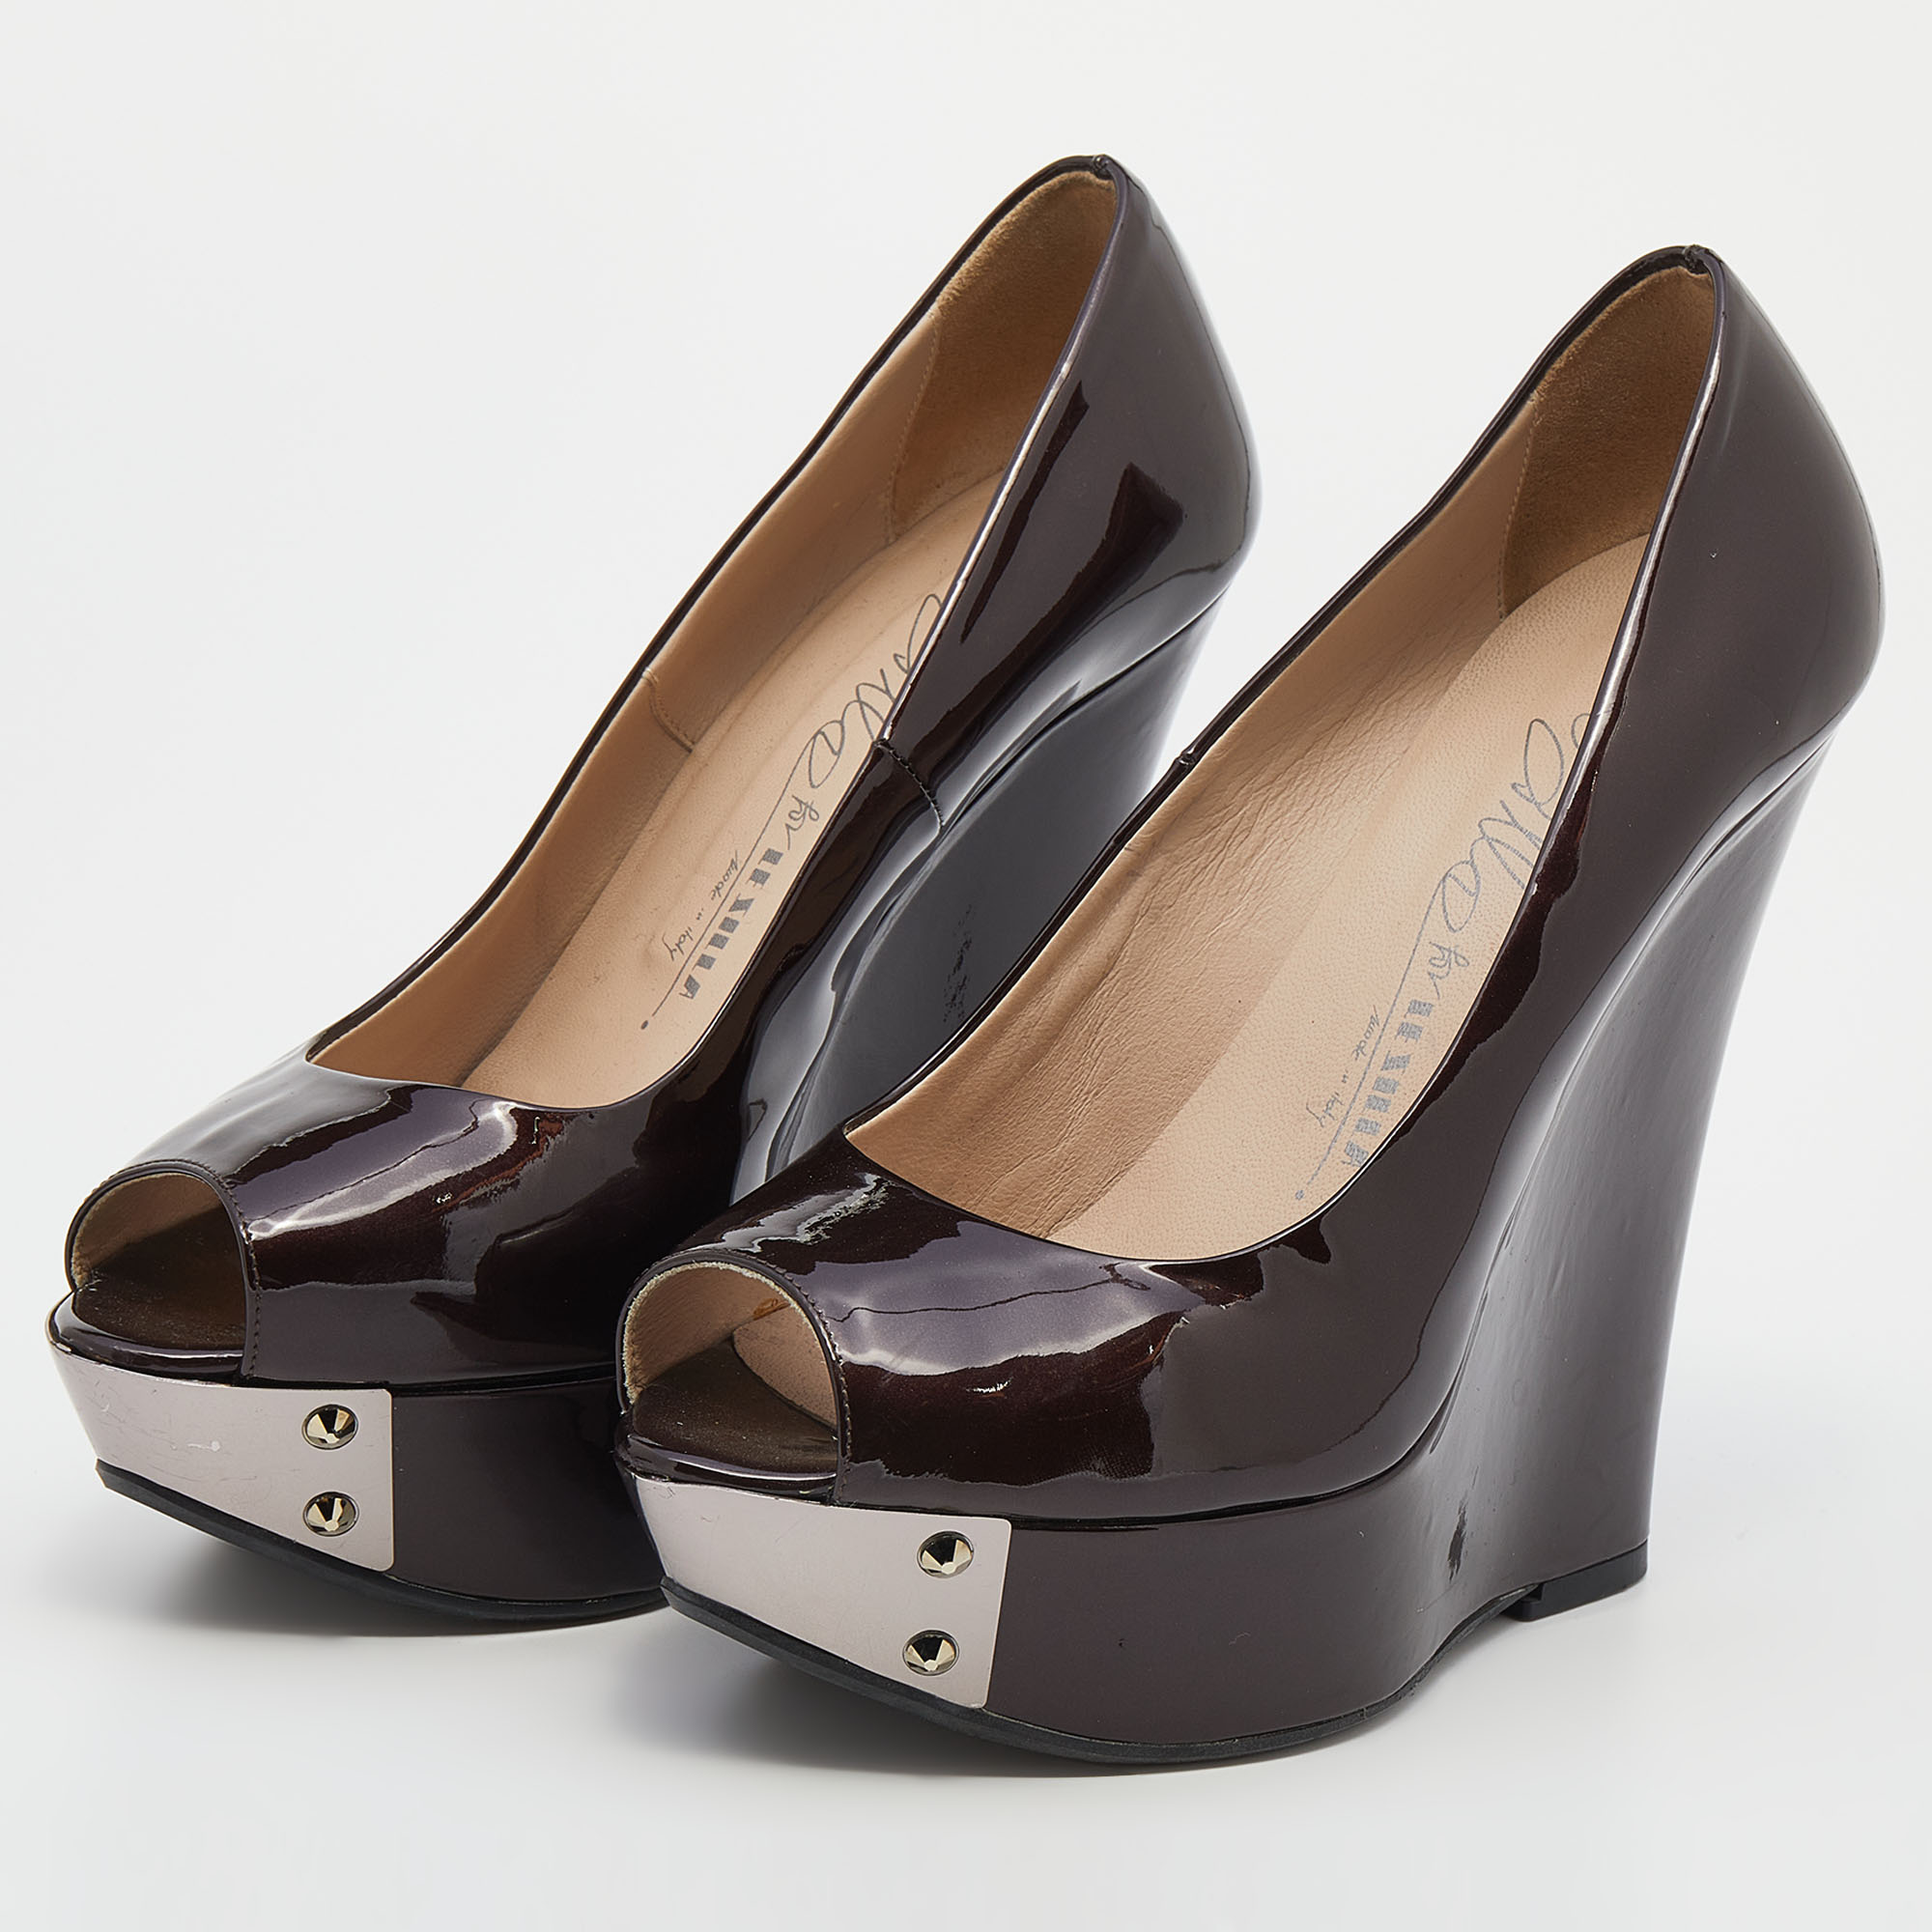 

Le Silla Burgundy Patent Leather Wedge Peep Toe Pumps Size